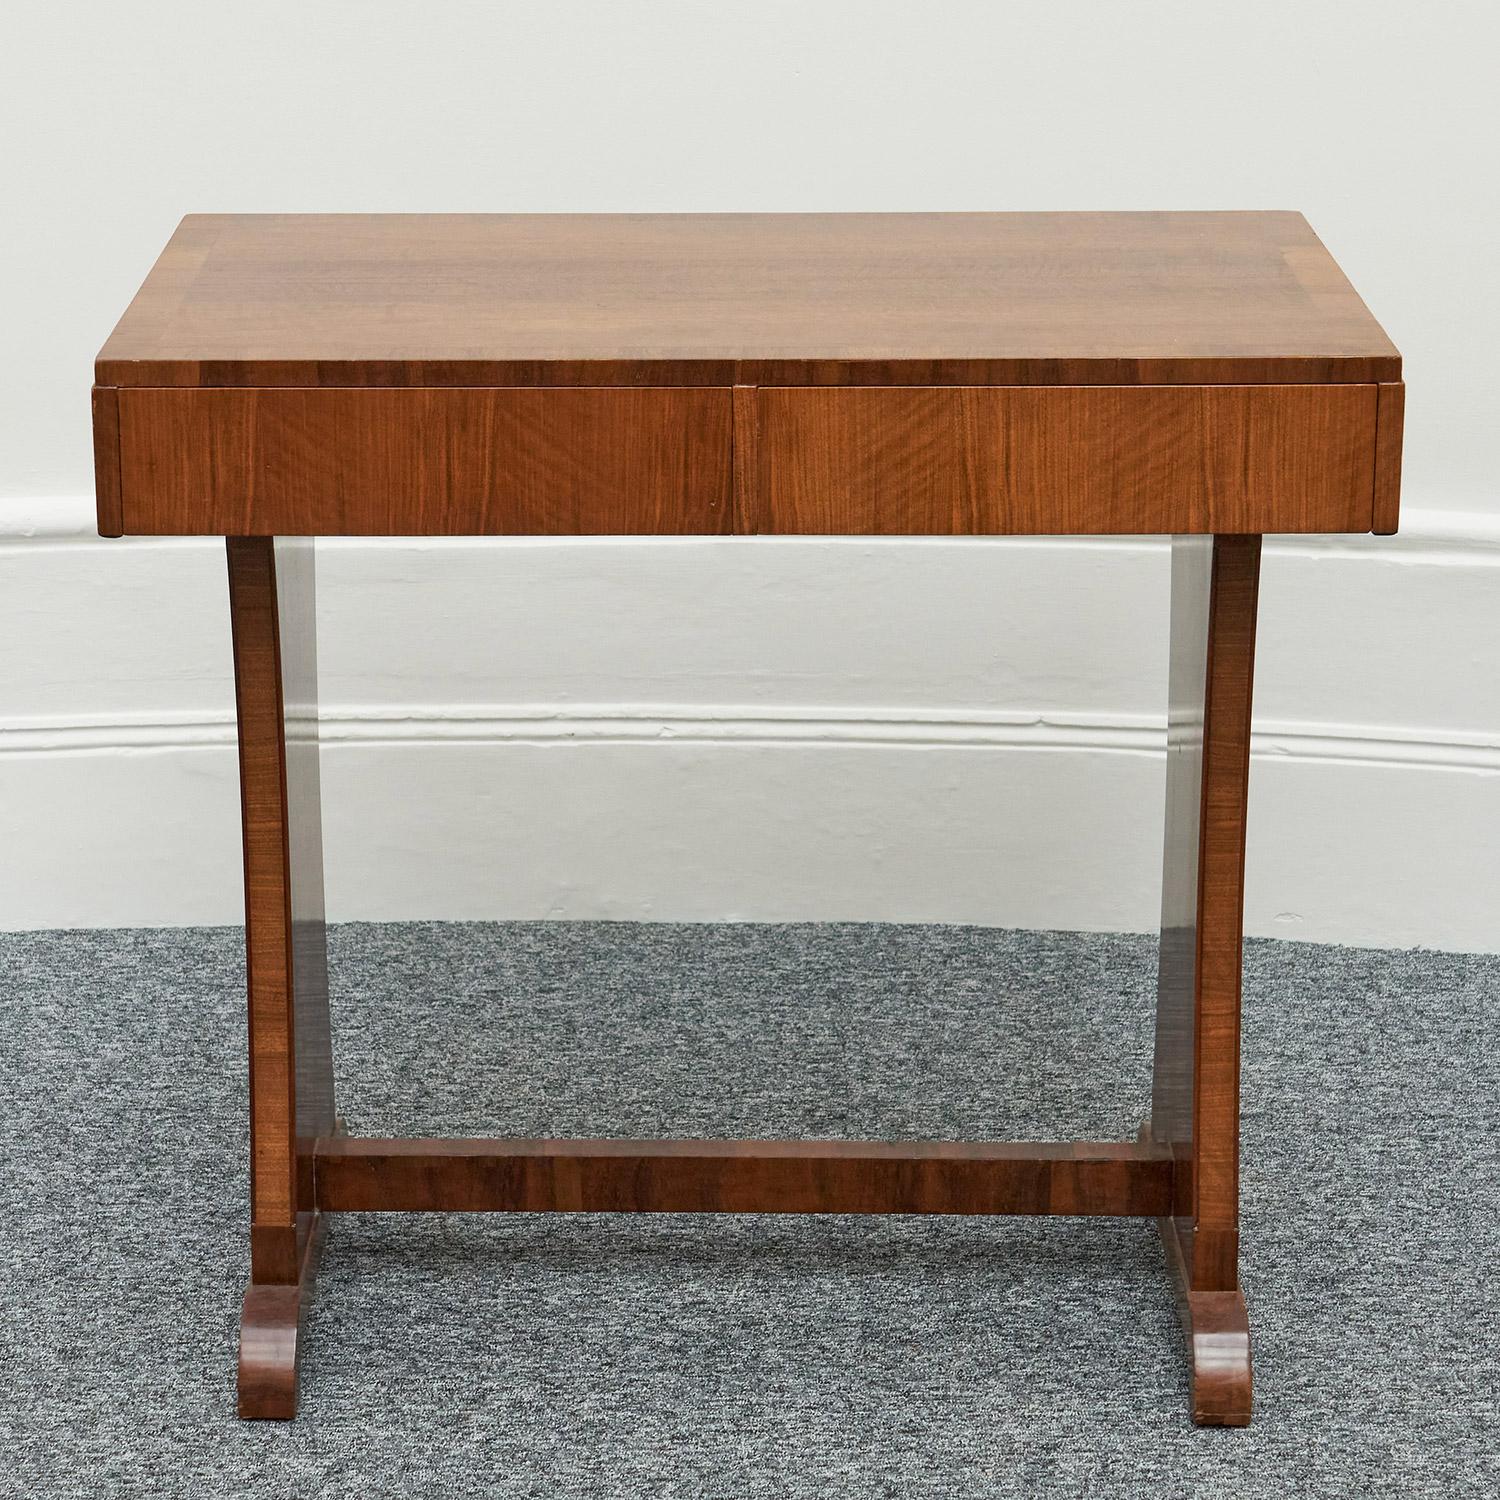 Art Deco writing desk or console table by Waring & Gillow. Burr & Figured walnut veneered throughout. Labelled 'Waring & Gillow 1932' to inside of left drawer. 

Dimensions: H 84 cm, W 91 cm, D 53 cm 

Origin: English

Date: Circa 1930

Item